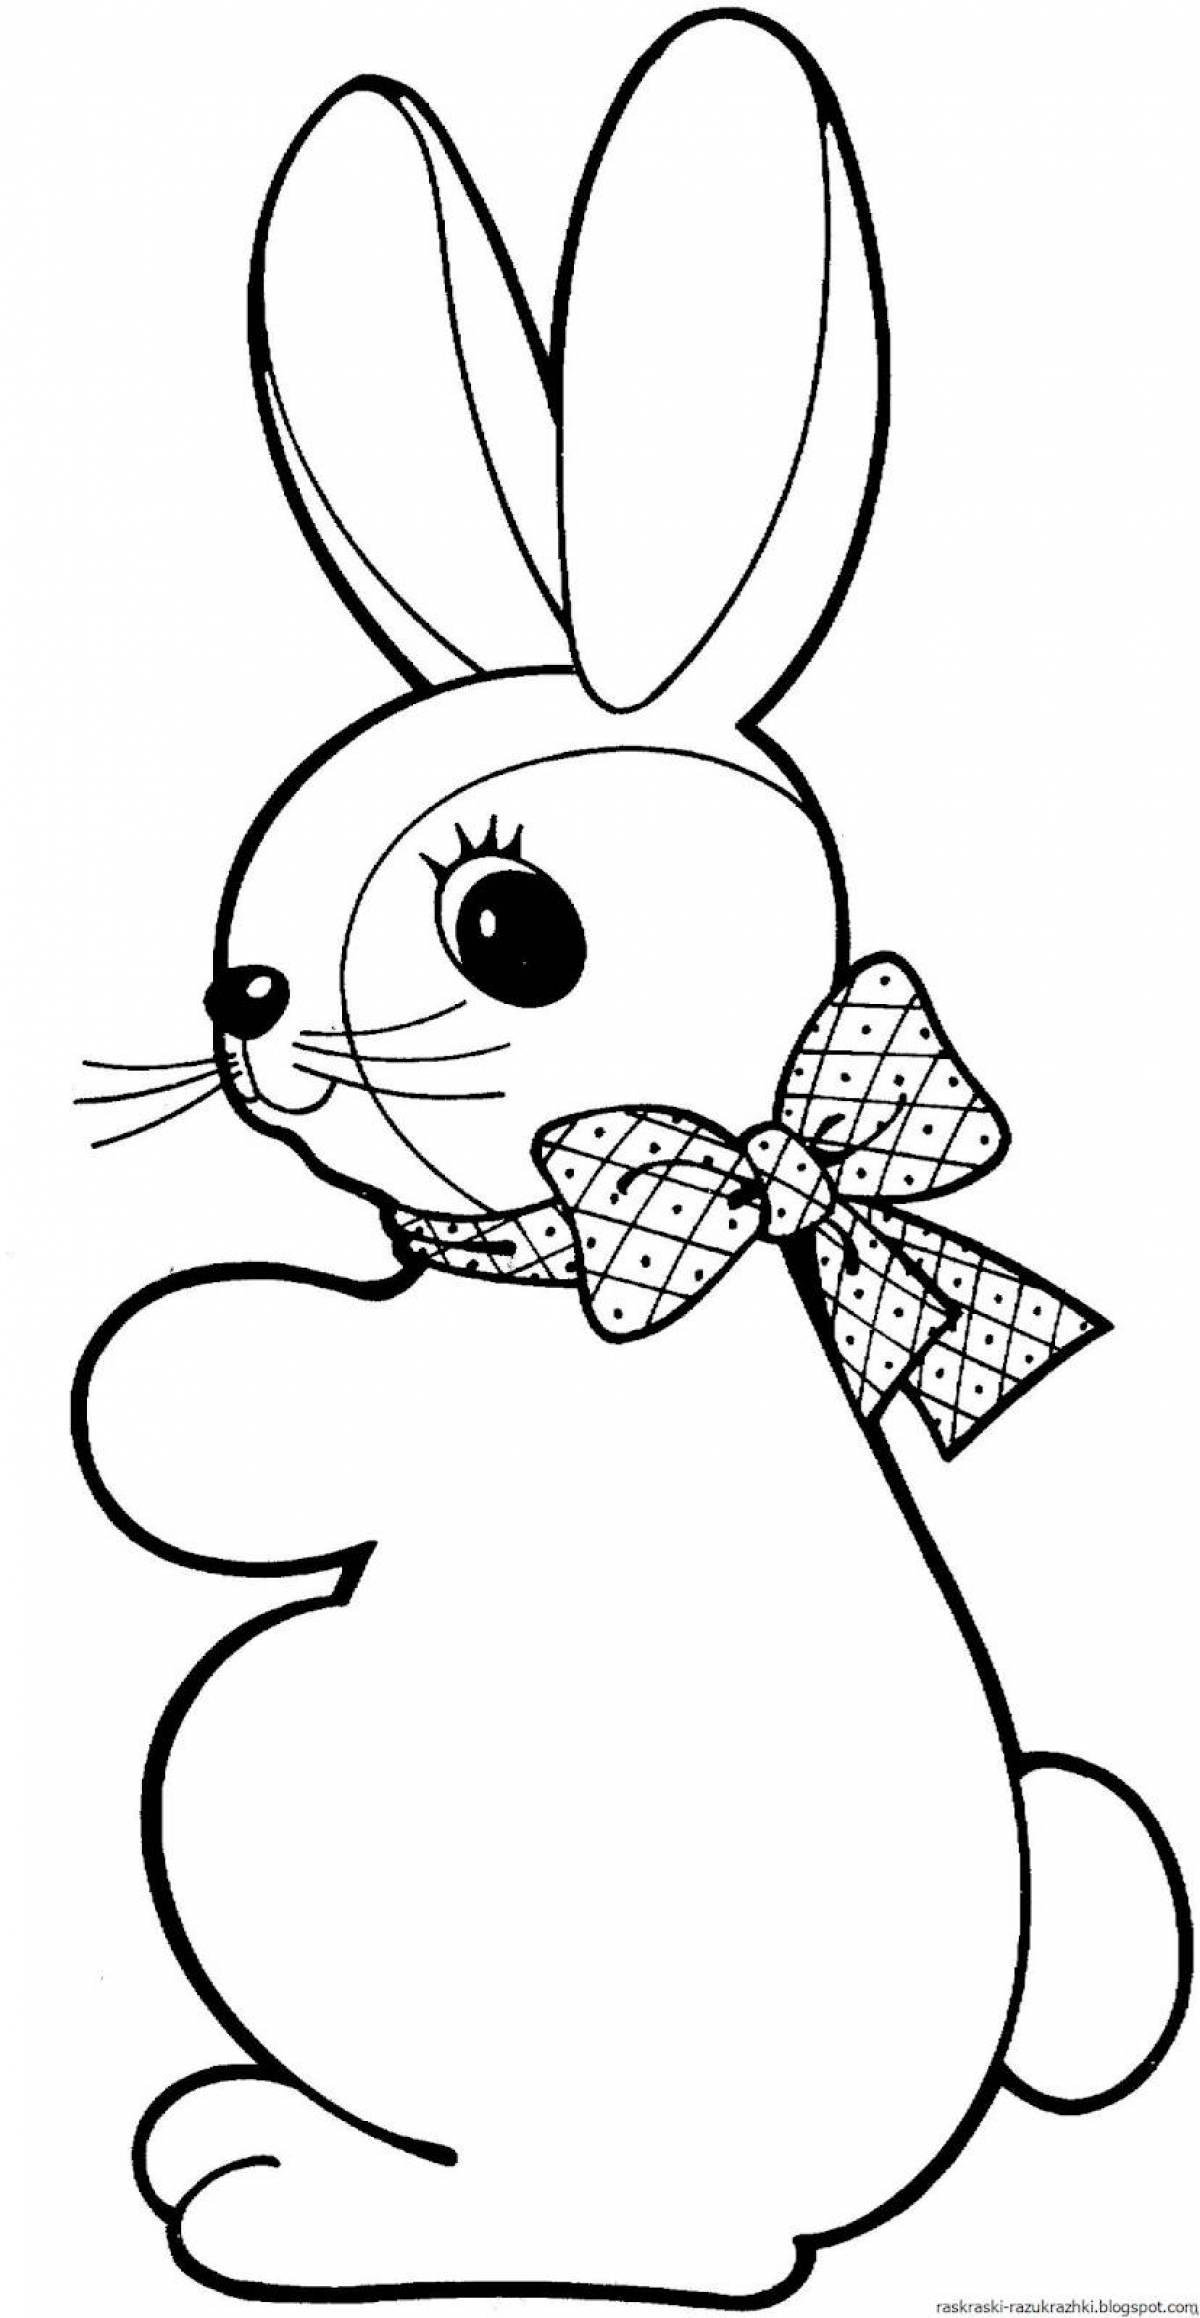 Fantastic hare coloring book for children 3-4 years old